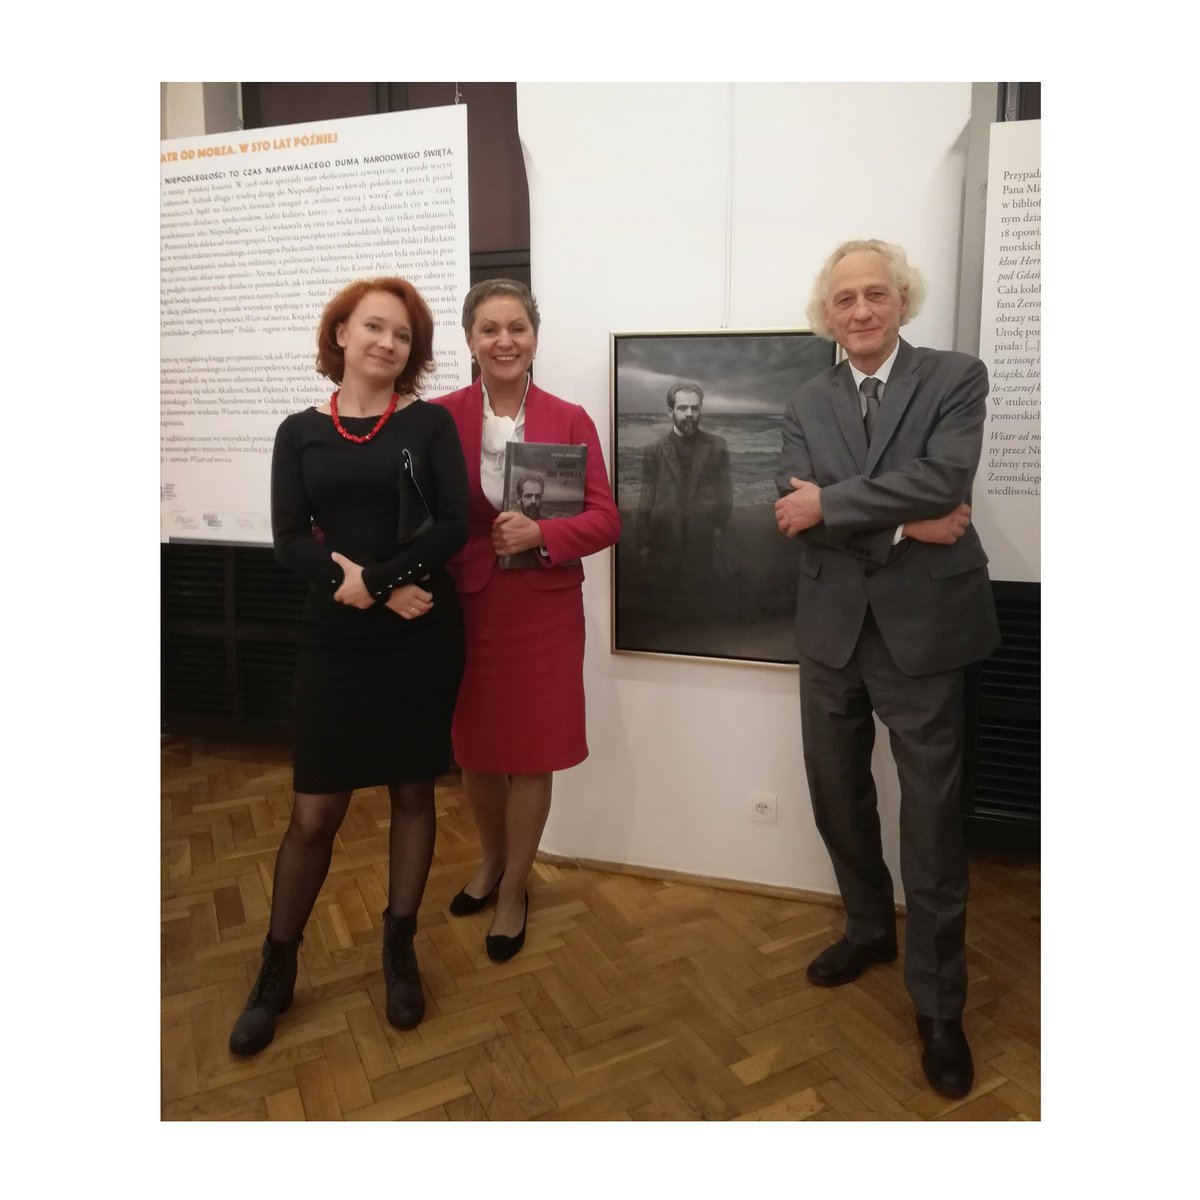 Me and Krystyna Danilecka President of city Słupsk and Władysław Zawistowski Director of Culture department, Marshall od Pomeranian Voivodeship.
'The Wind from the sea. 100 years later' 
Museum of Central Pomerania in Słupsk

#mng #museumshow #museumquality #annawypych #artmuseum